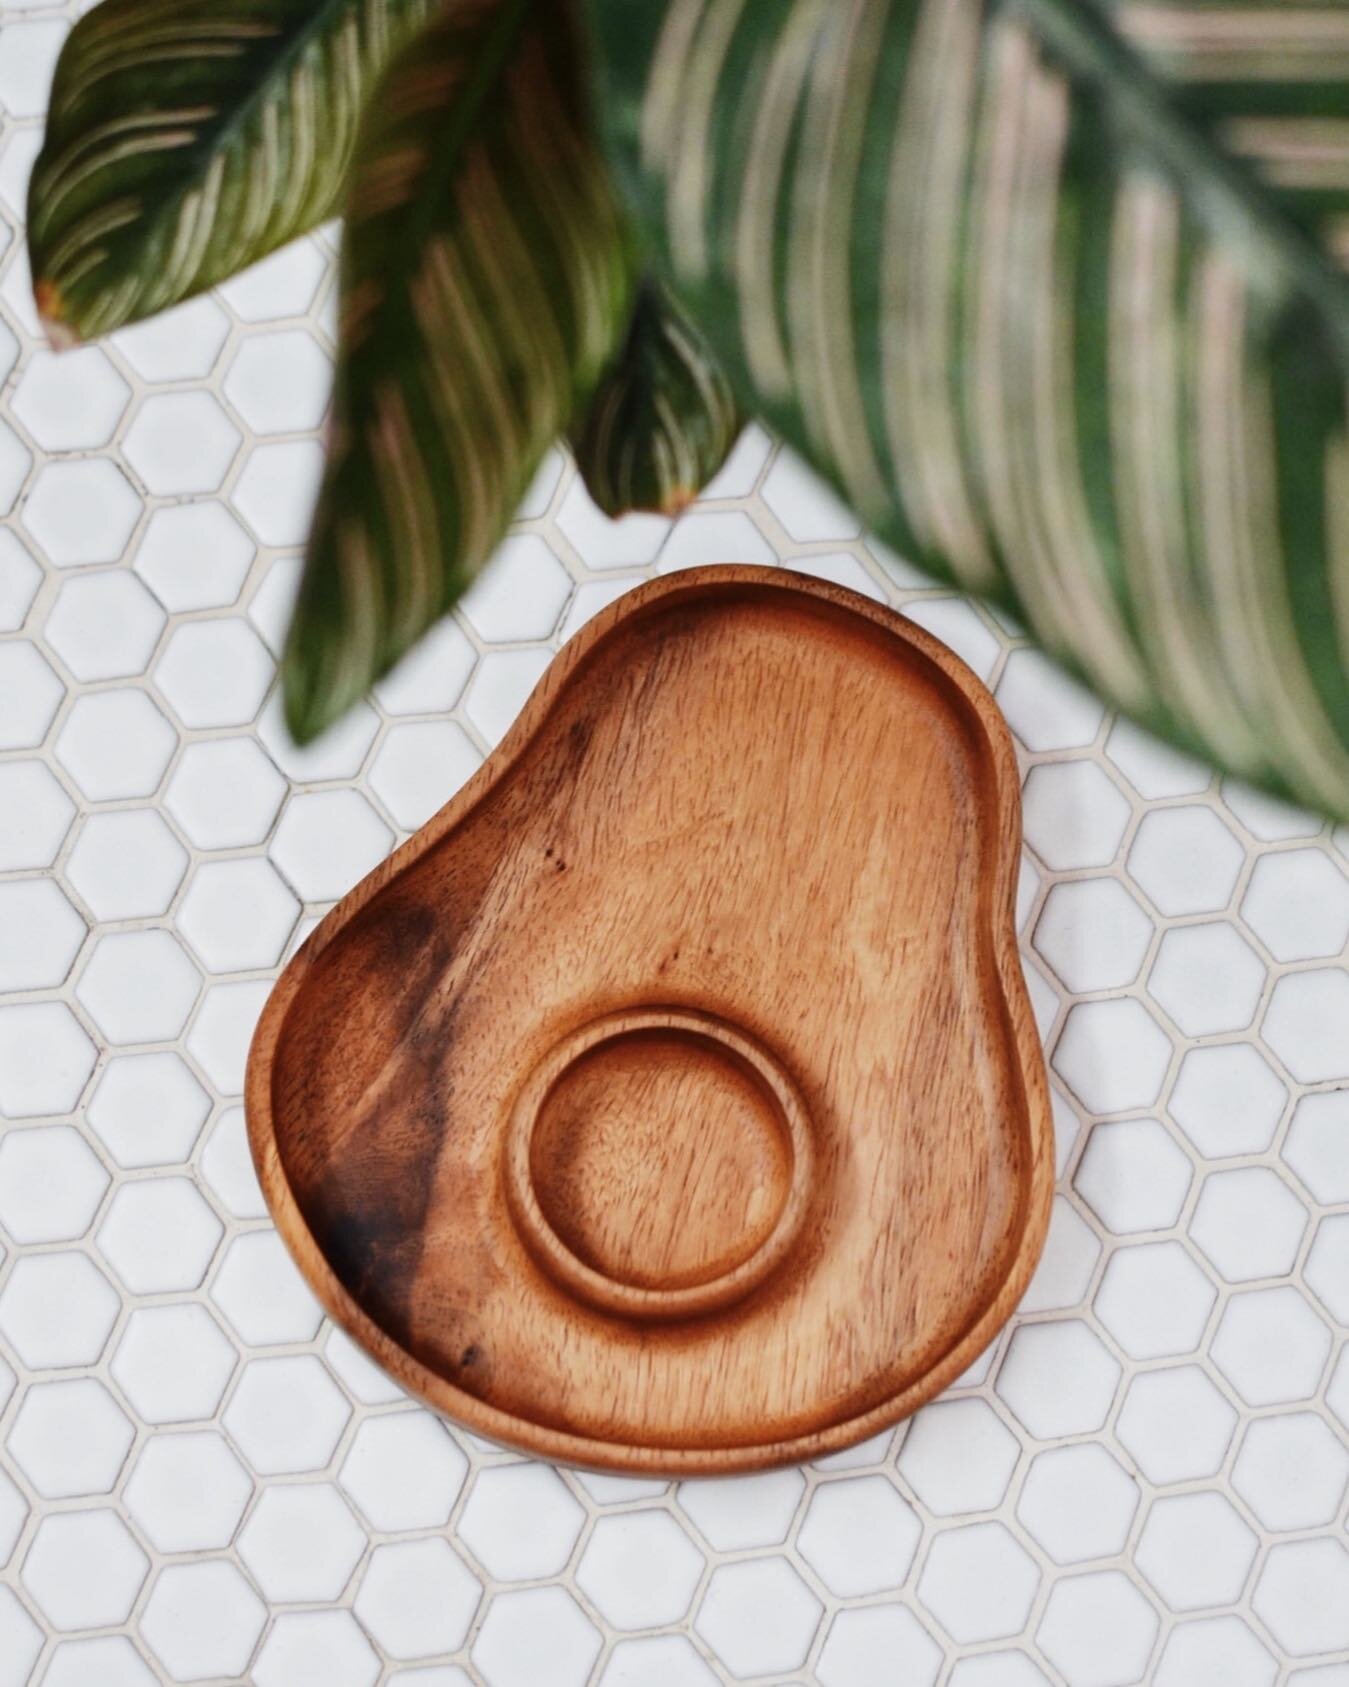 Happy Friyay! Weekend&rsquo;s almost here!🙌🏻🥑 Wooden Kids Plates :: We use one solid piece of local timber (fallen trees) to make our kids plates; no glue used. Sanded smooth &amp; finished with non-toxic mineral oil. #sustainableliving #fallentre